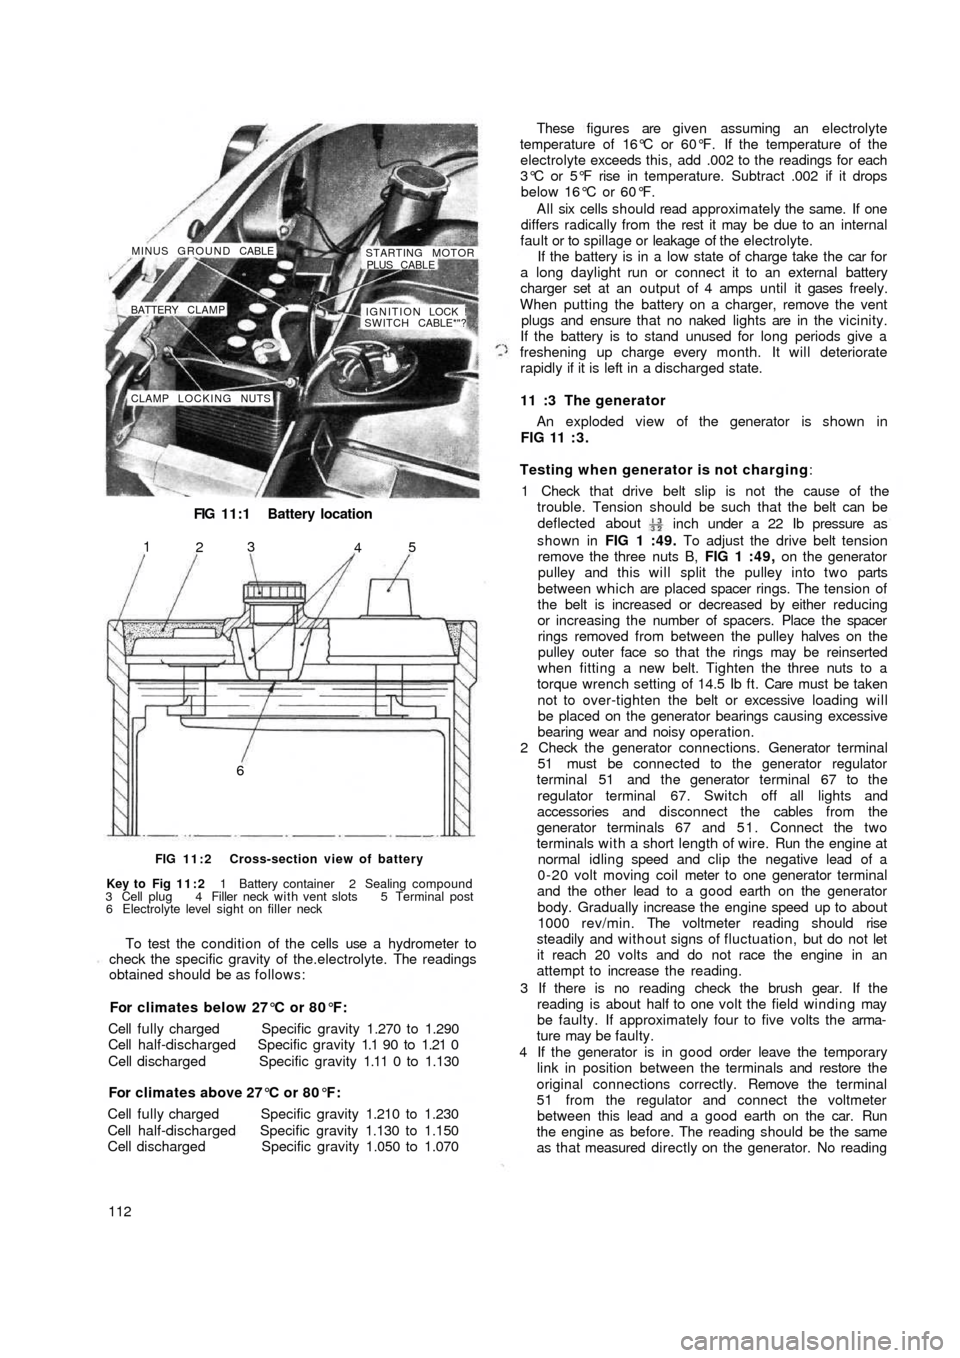 FIAT 500 1967 1.G Workshop Manual FIG 11:1 Battery location
CLAMP LOCKING NUTSIGNITION LOCK !
SWITCH CABLE*"? BATTERY CLAMP MINUS GROUND CABLE
STARTING MOTOR
PLUS CABLE
65
4 3
2 1
FIG 11:2 Cross-section view of battery
Key to  Fig  11